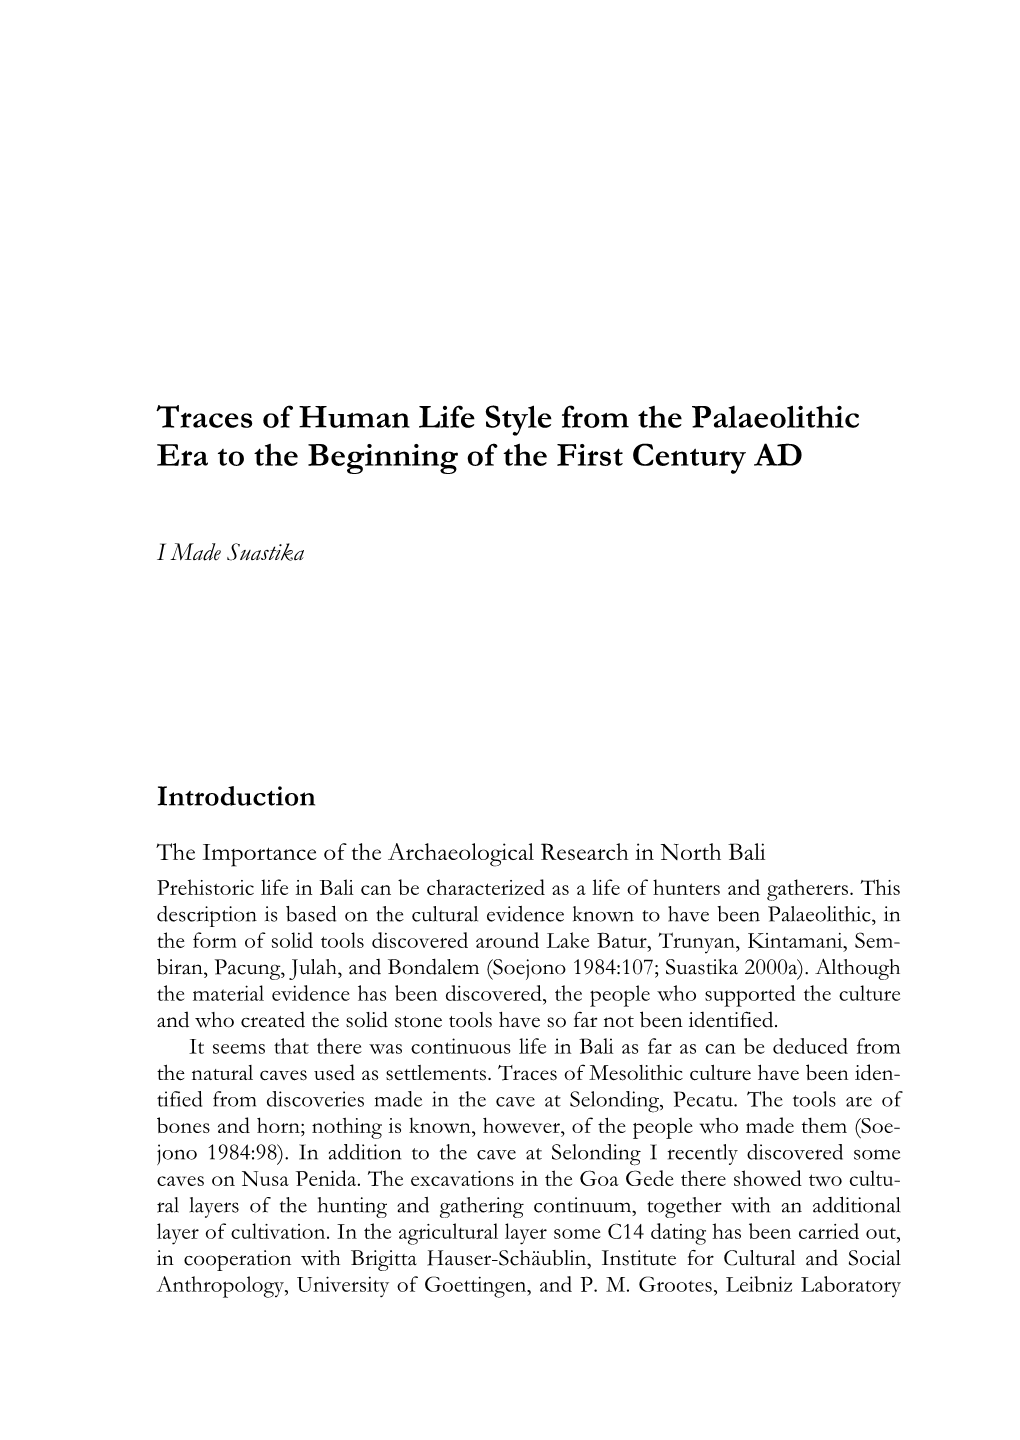 Traces of Human Life Style from the Palaeolithic Era to the Beginning of the First Century AD